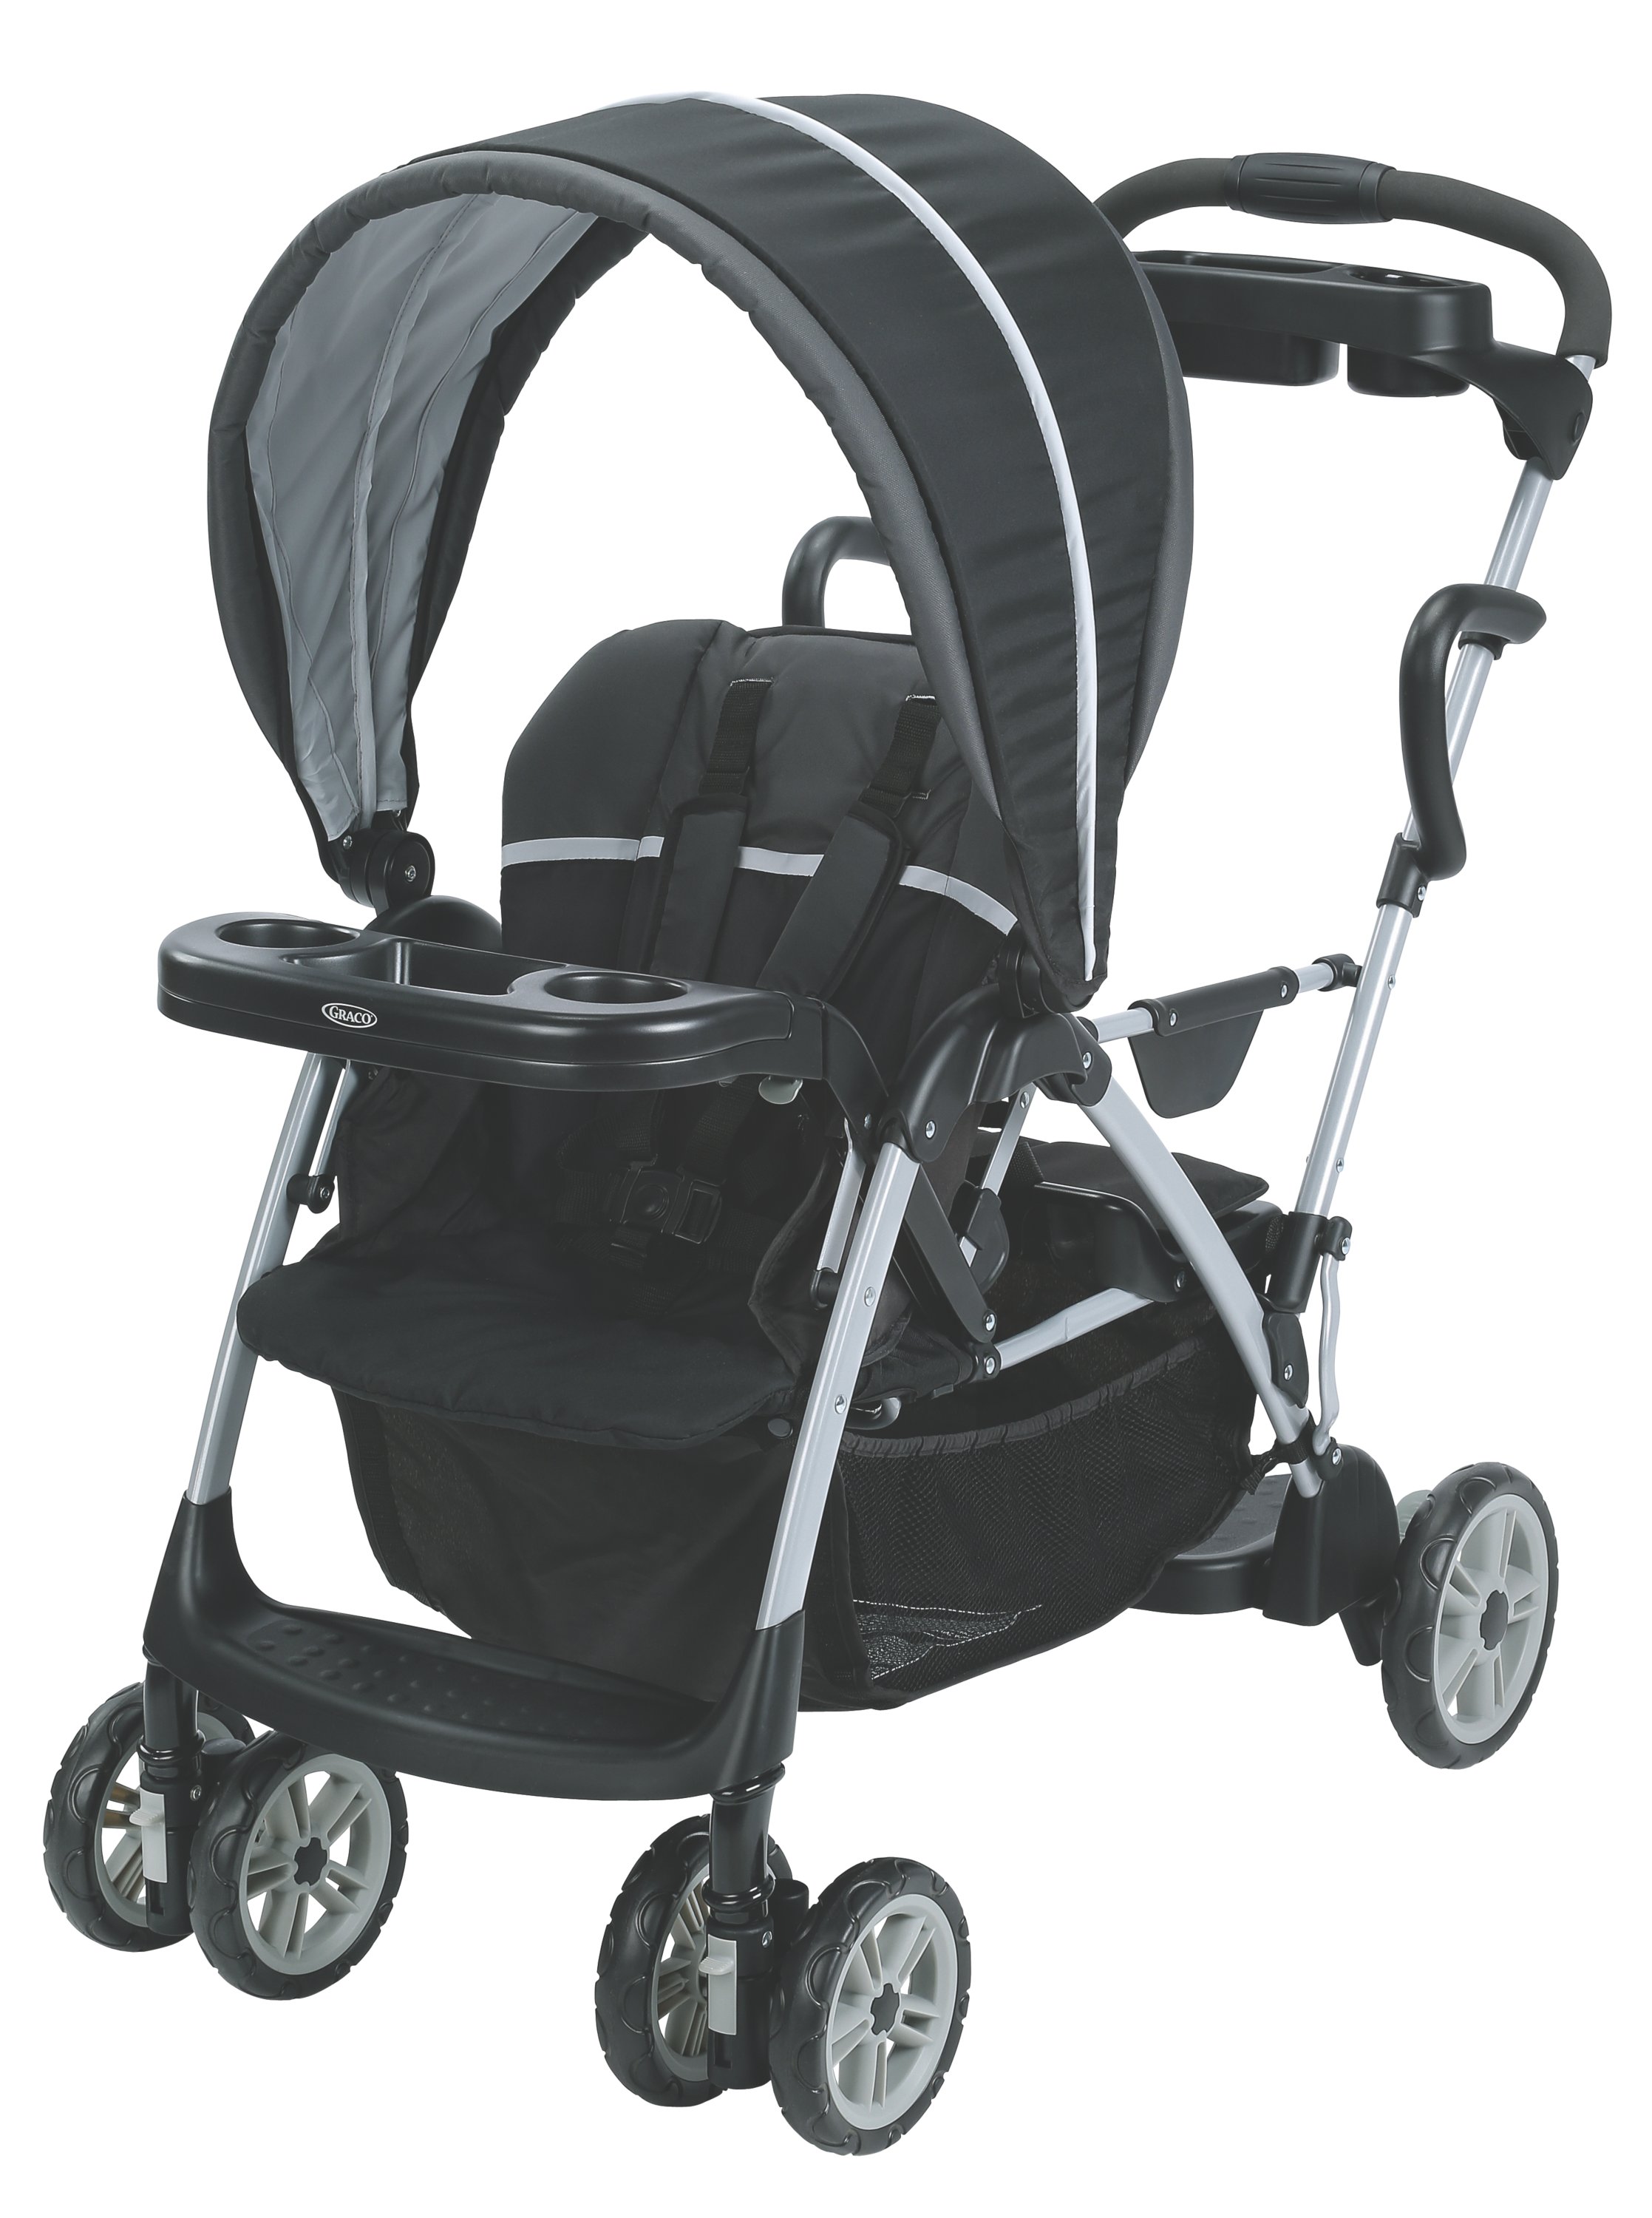 Graco Roomfor2 Click Connect Stand and Ride Stroller Gotham 